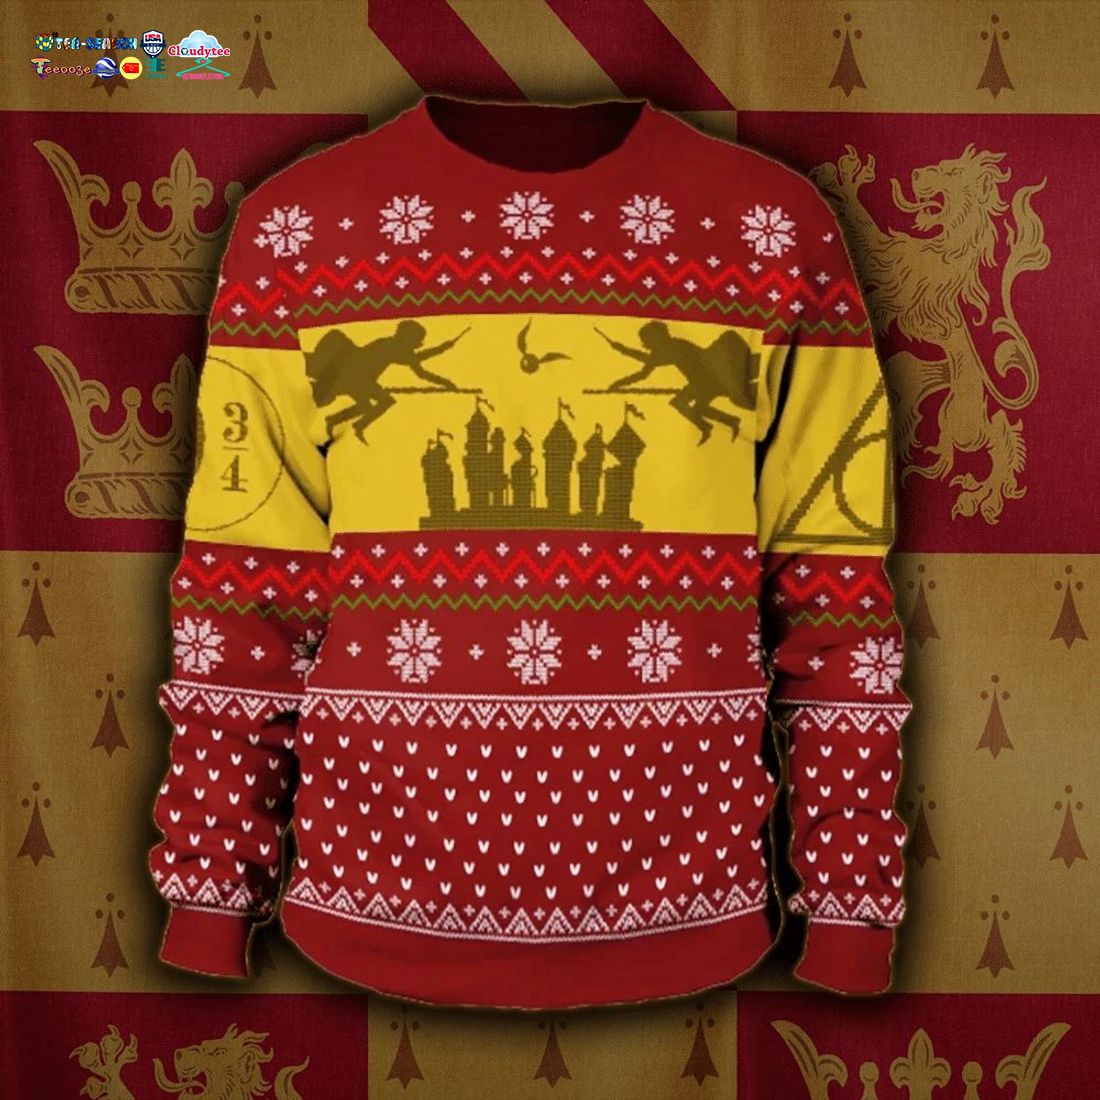 Harry Potter Ugly Christmas Sweater - Good one dear